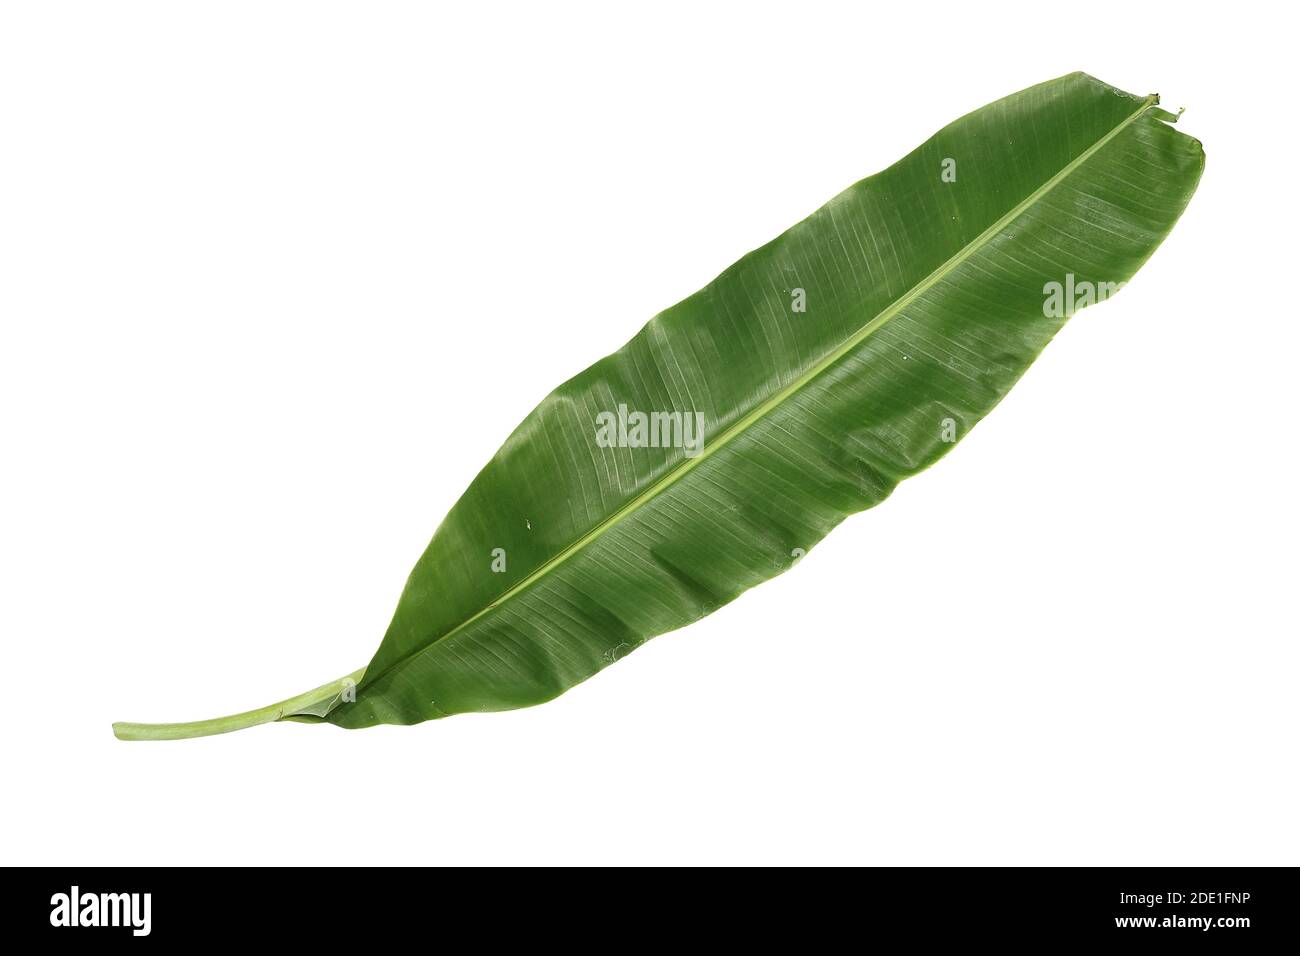 Banana leaves can be used to wrap desserts or savory dishes. On a white background Stock Photo